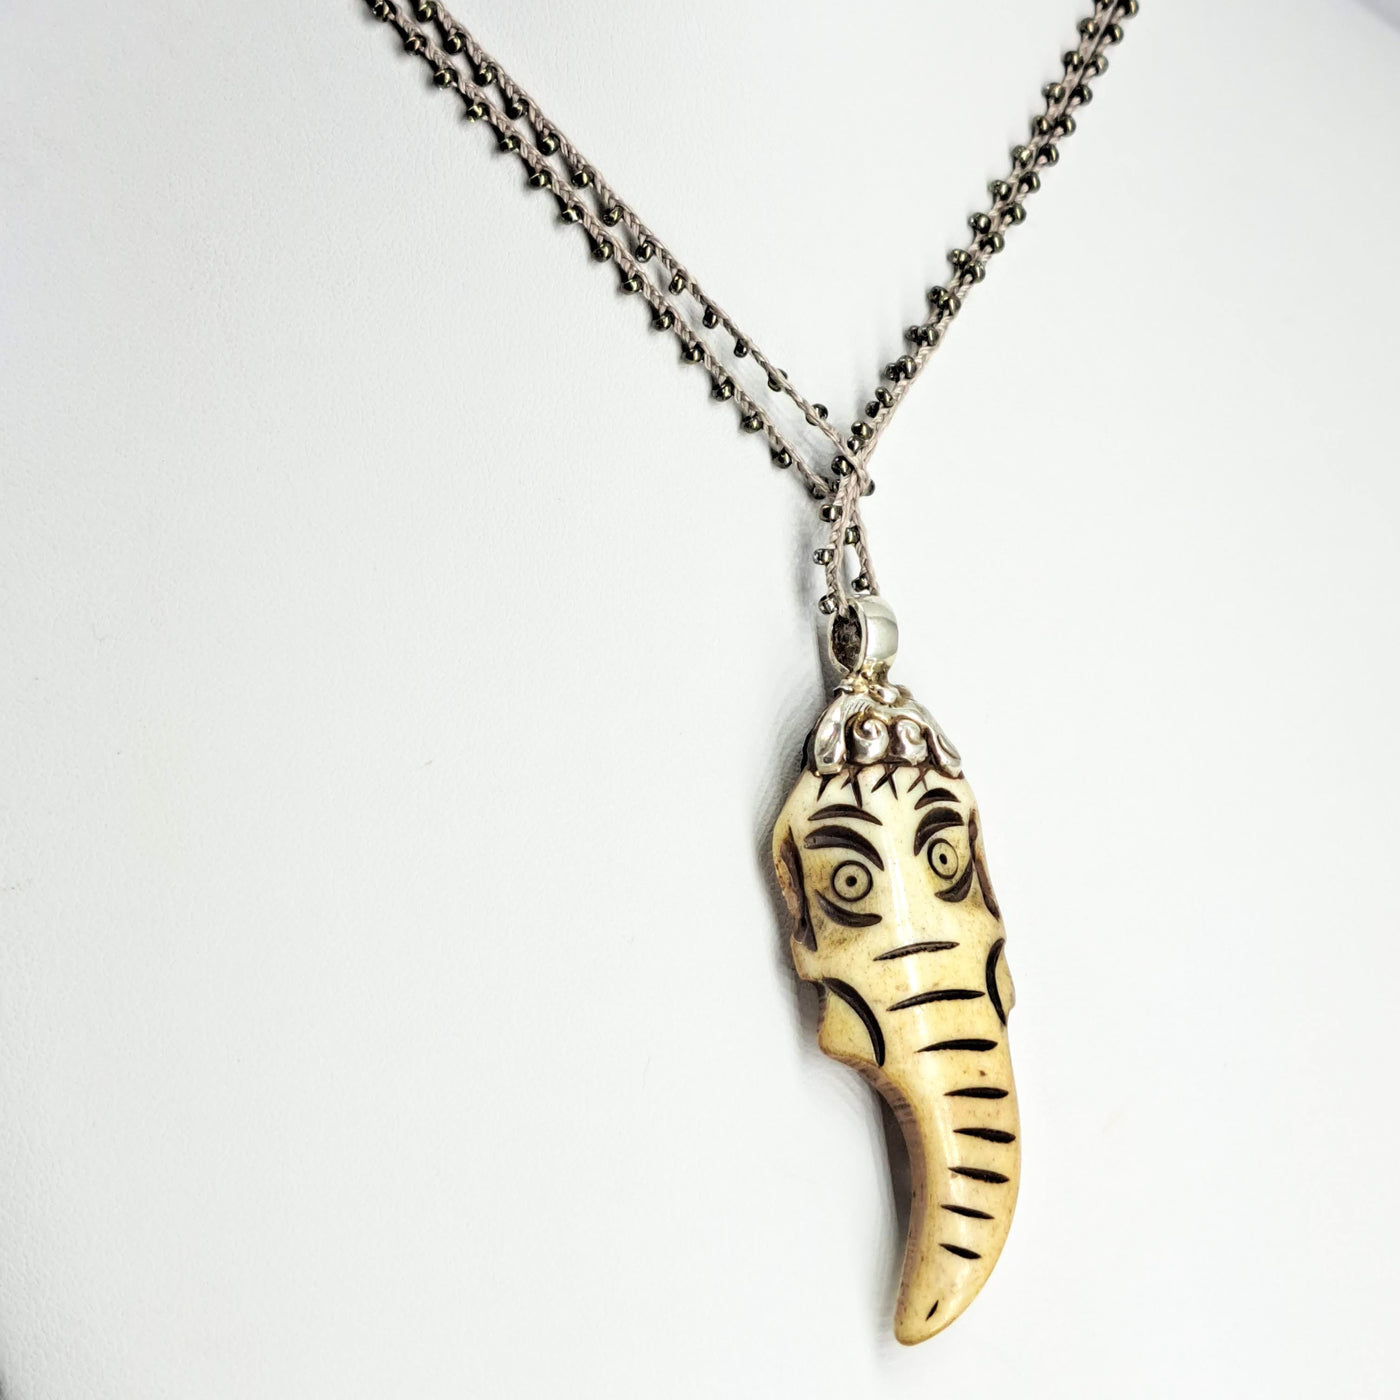 "Open The Trunk" Pendant Necklace - Bone, Sterling